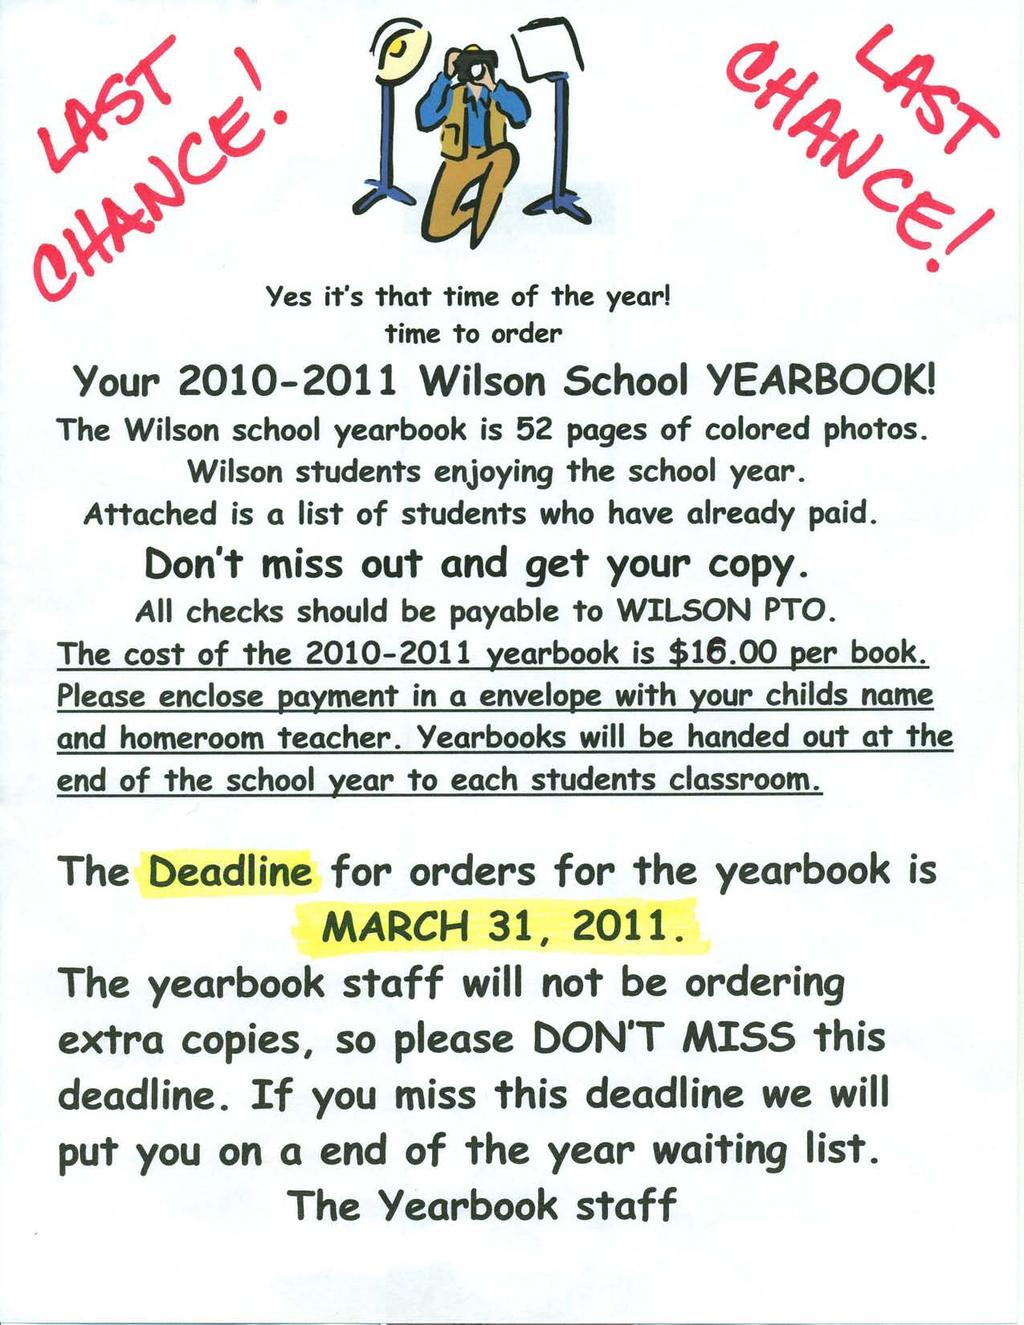 Your 2010-2011 Yes it's that time of the yearl time to order Wilson School YEARBOOKI The Wilson school yearbook is 52 pages of colored photos. Wilson students enjoying the school year.